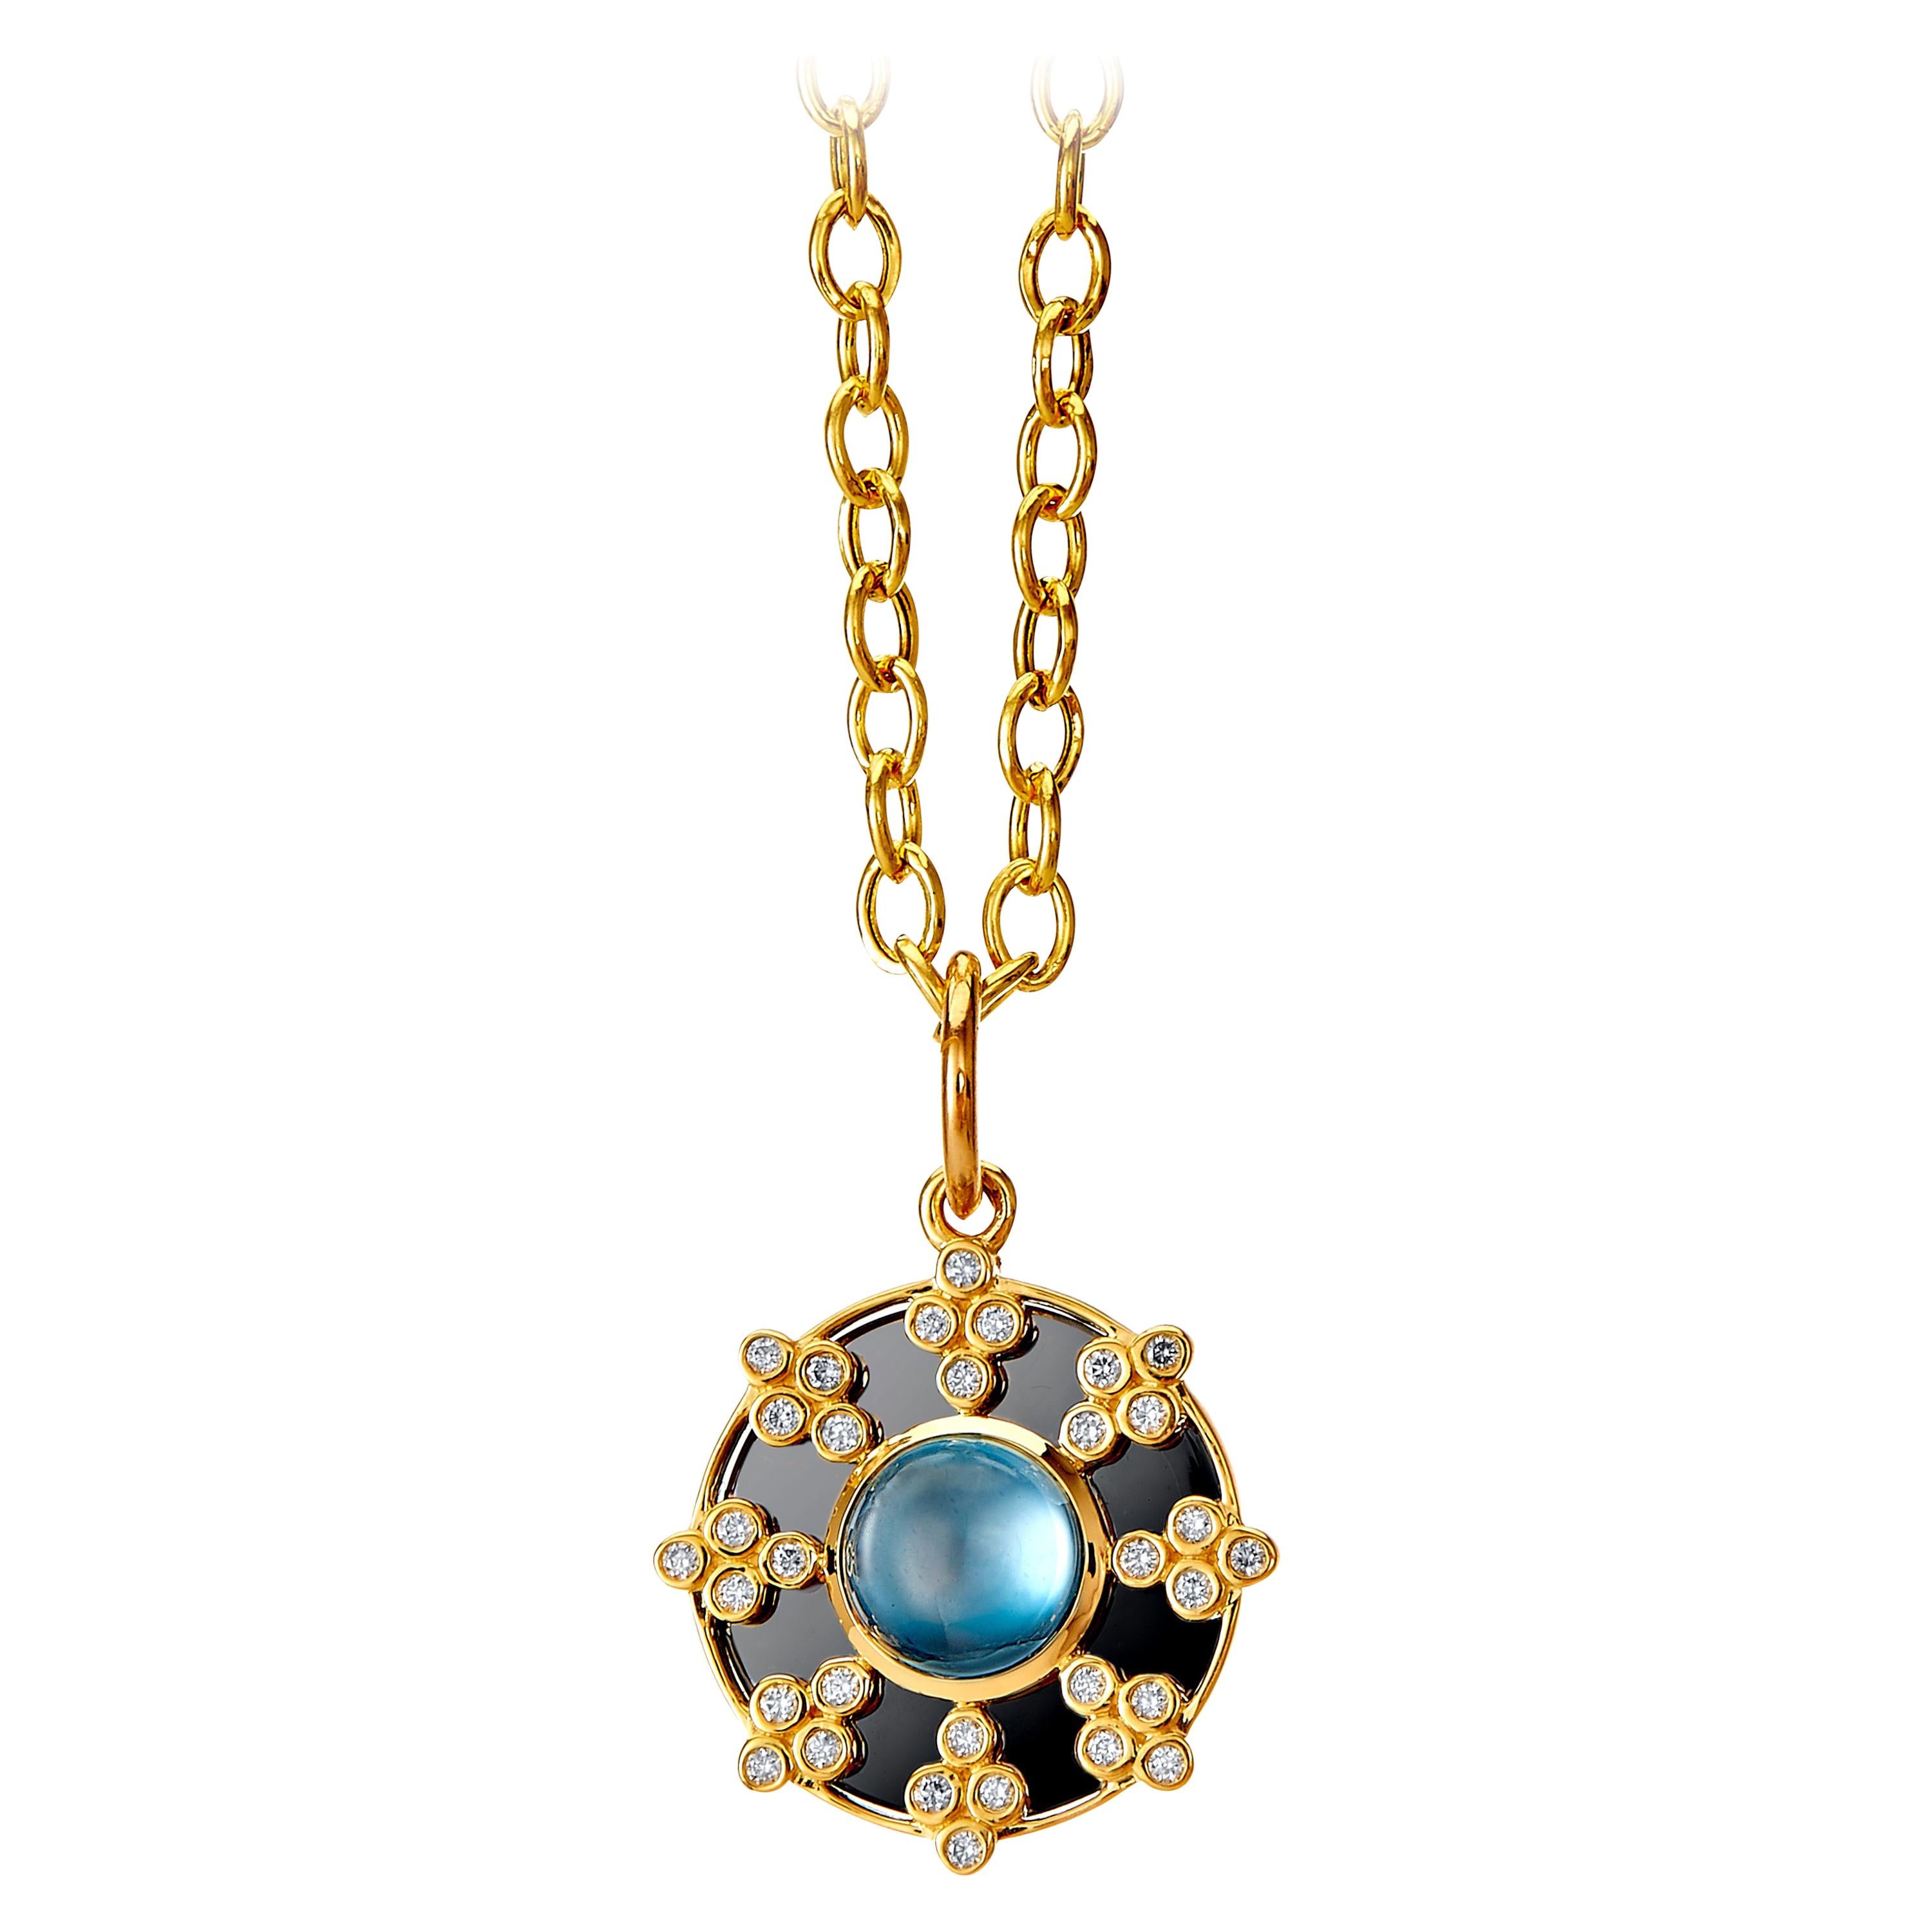 Syna Yellow Gold and Oxidized Silver Pendant with Topaz and Diamonds